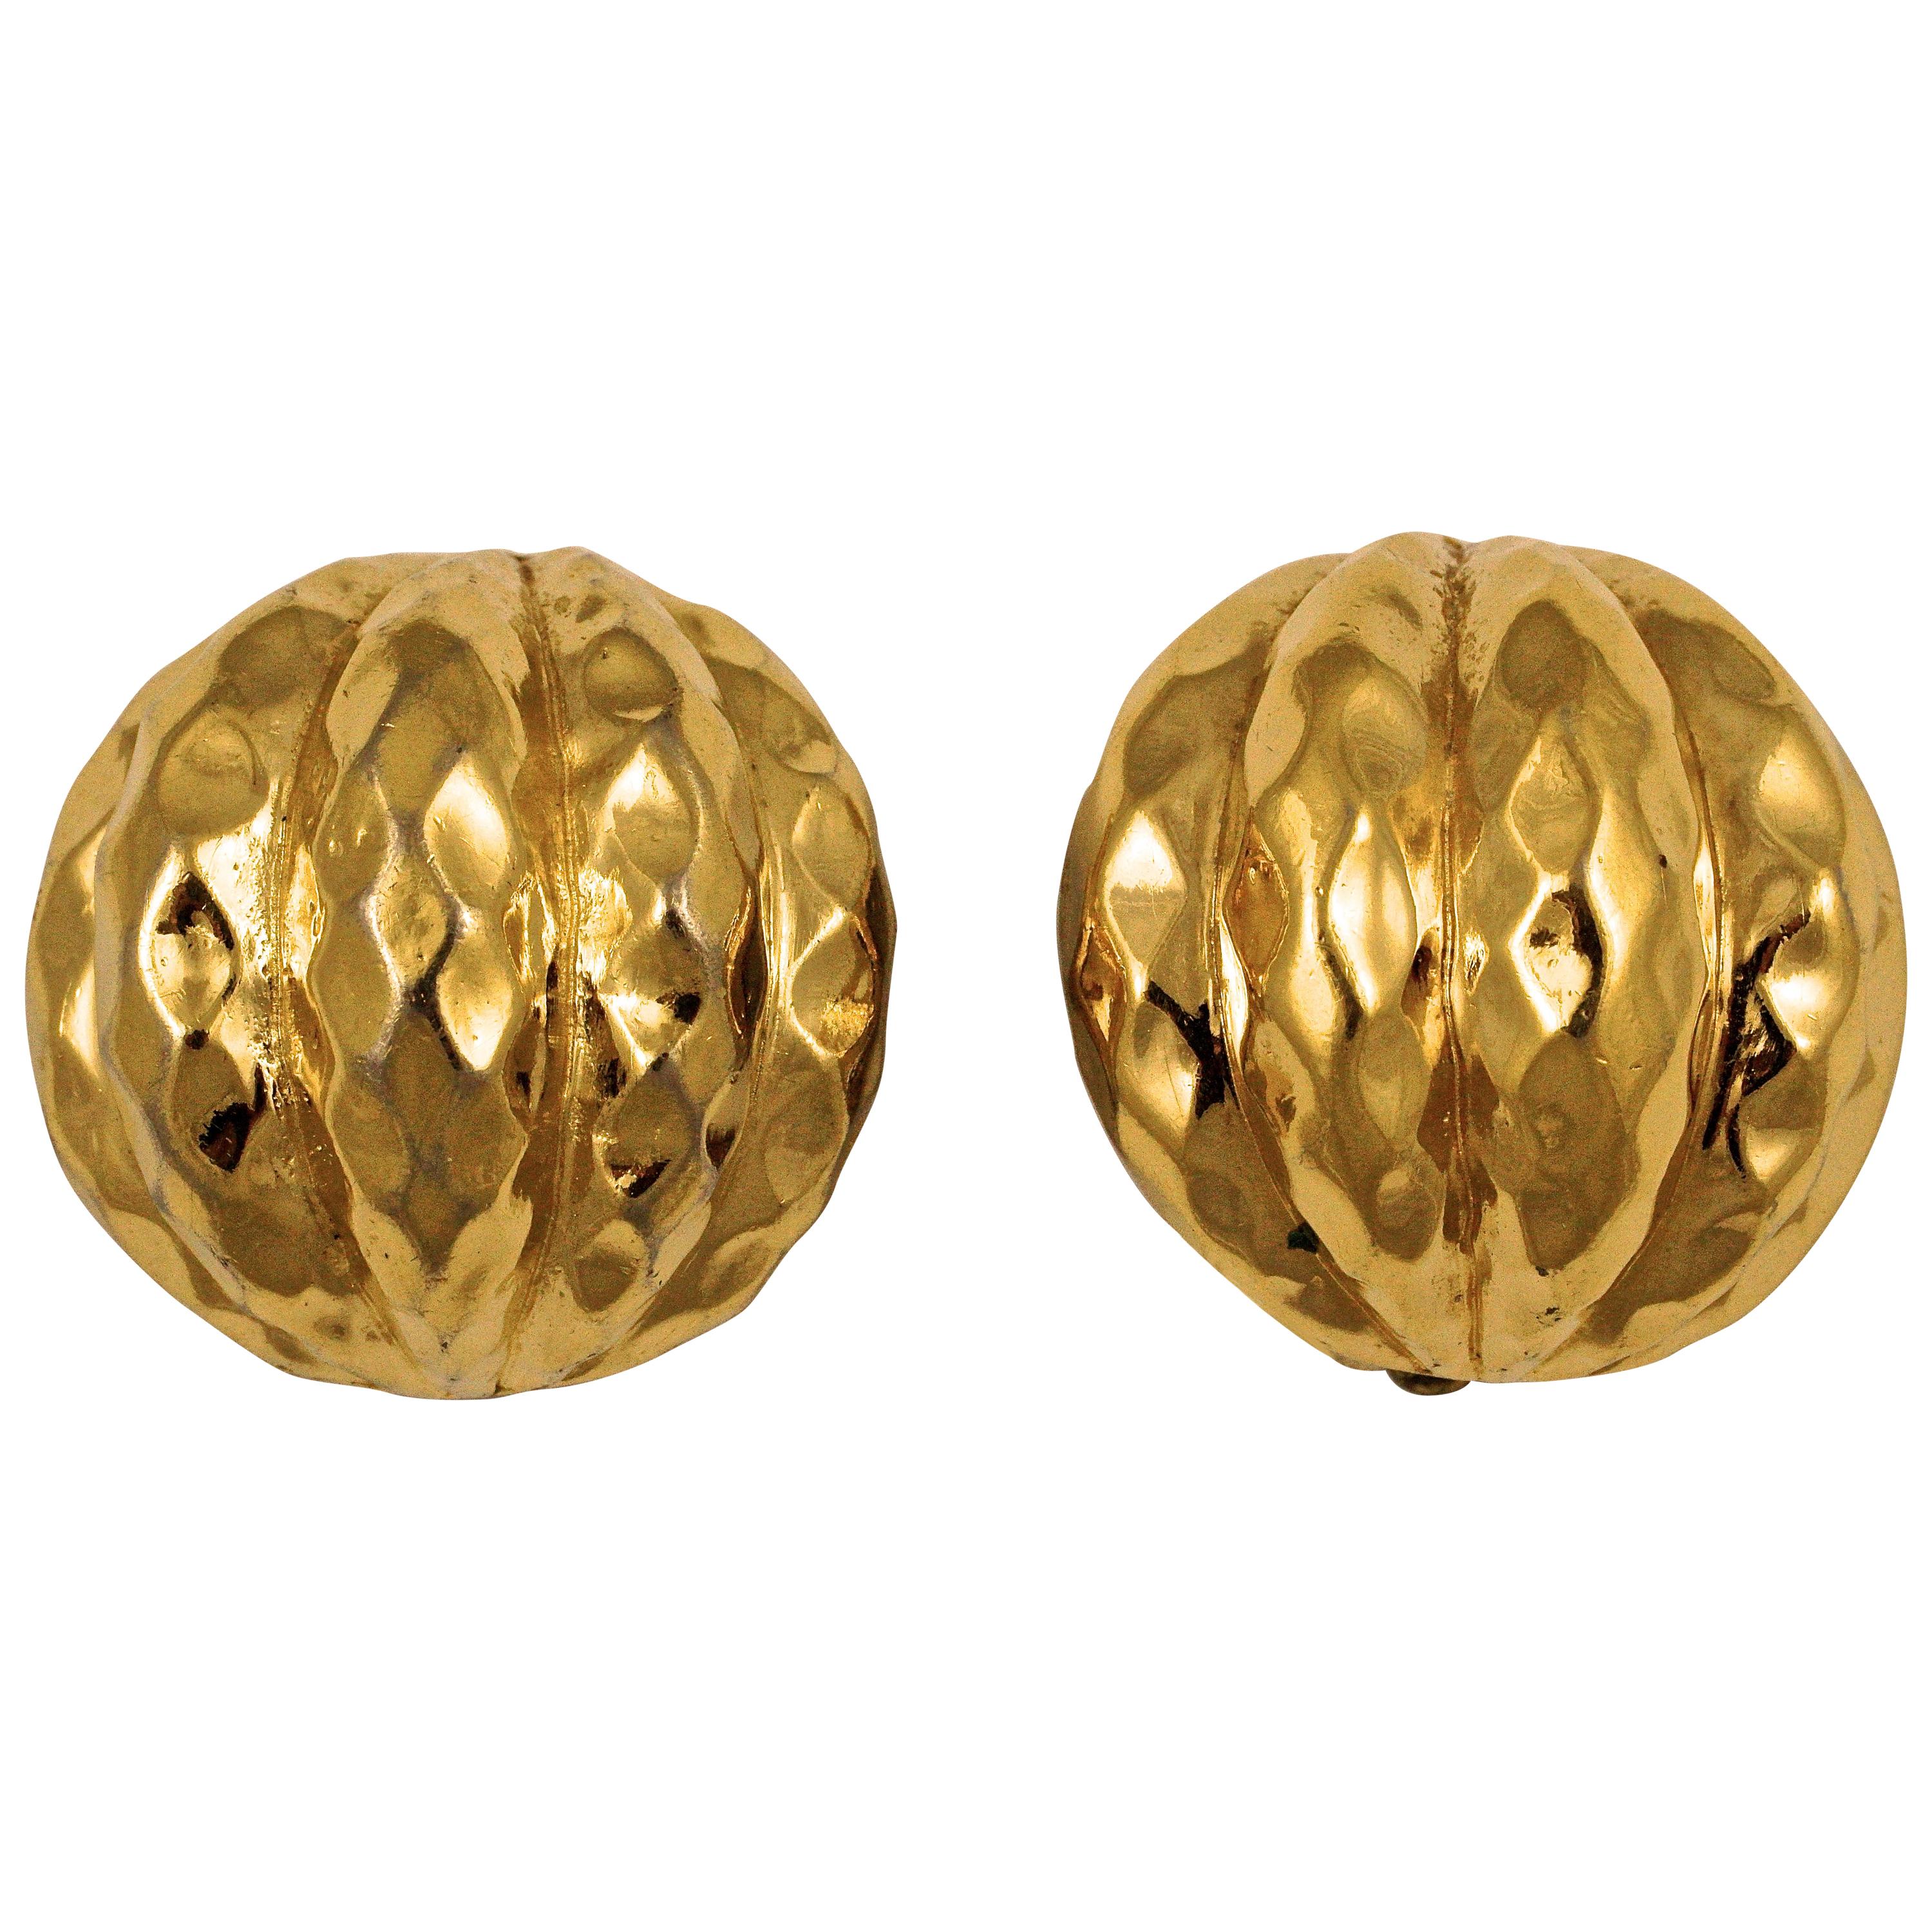 Ciner Gold Plated Domed Clip On Earrings with a Ridged and Patterned Design For Sale